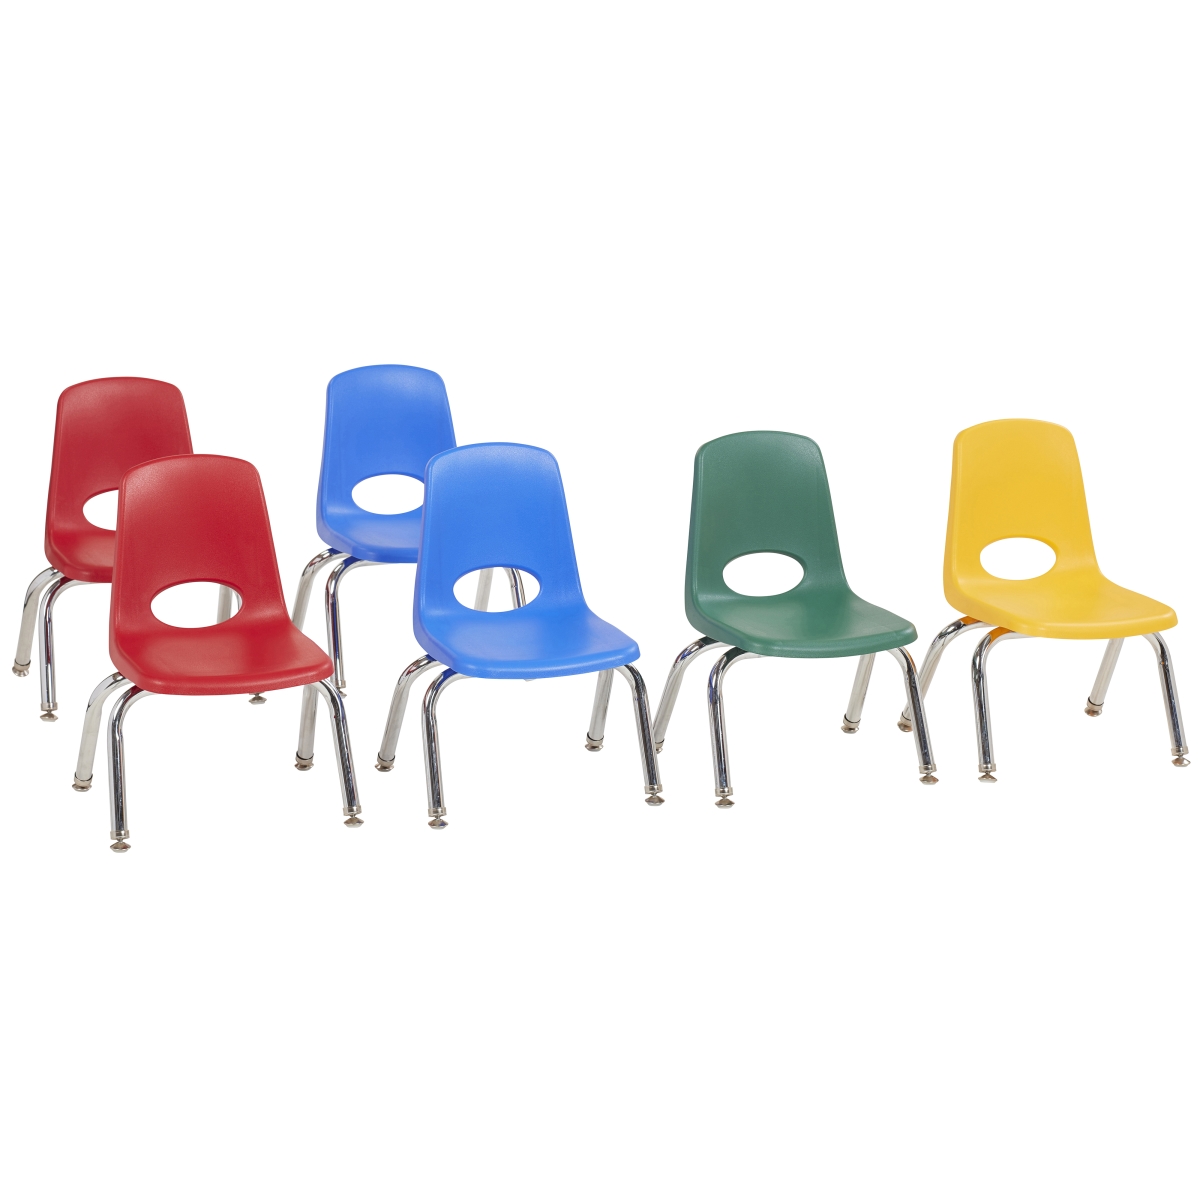 10358-as 10 In. Stack Chair With Swivel Glide - Assorted Color